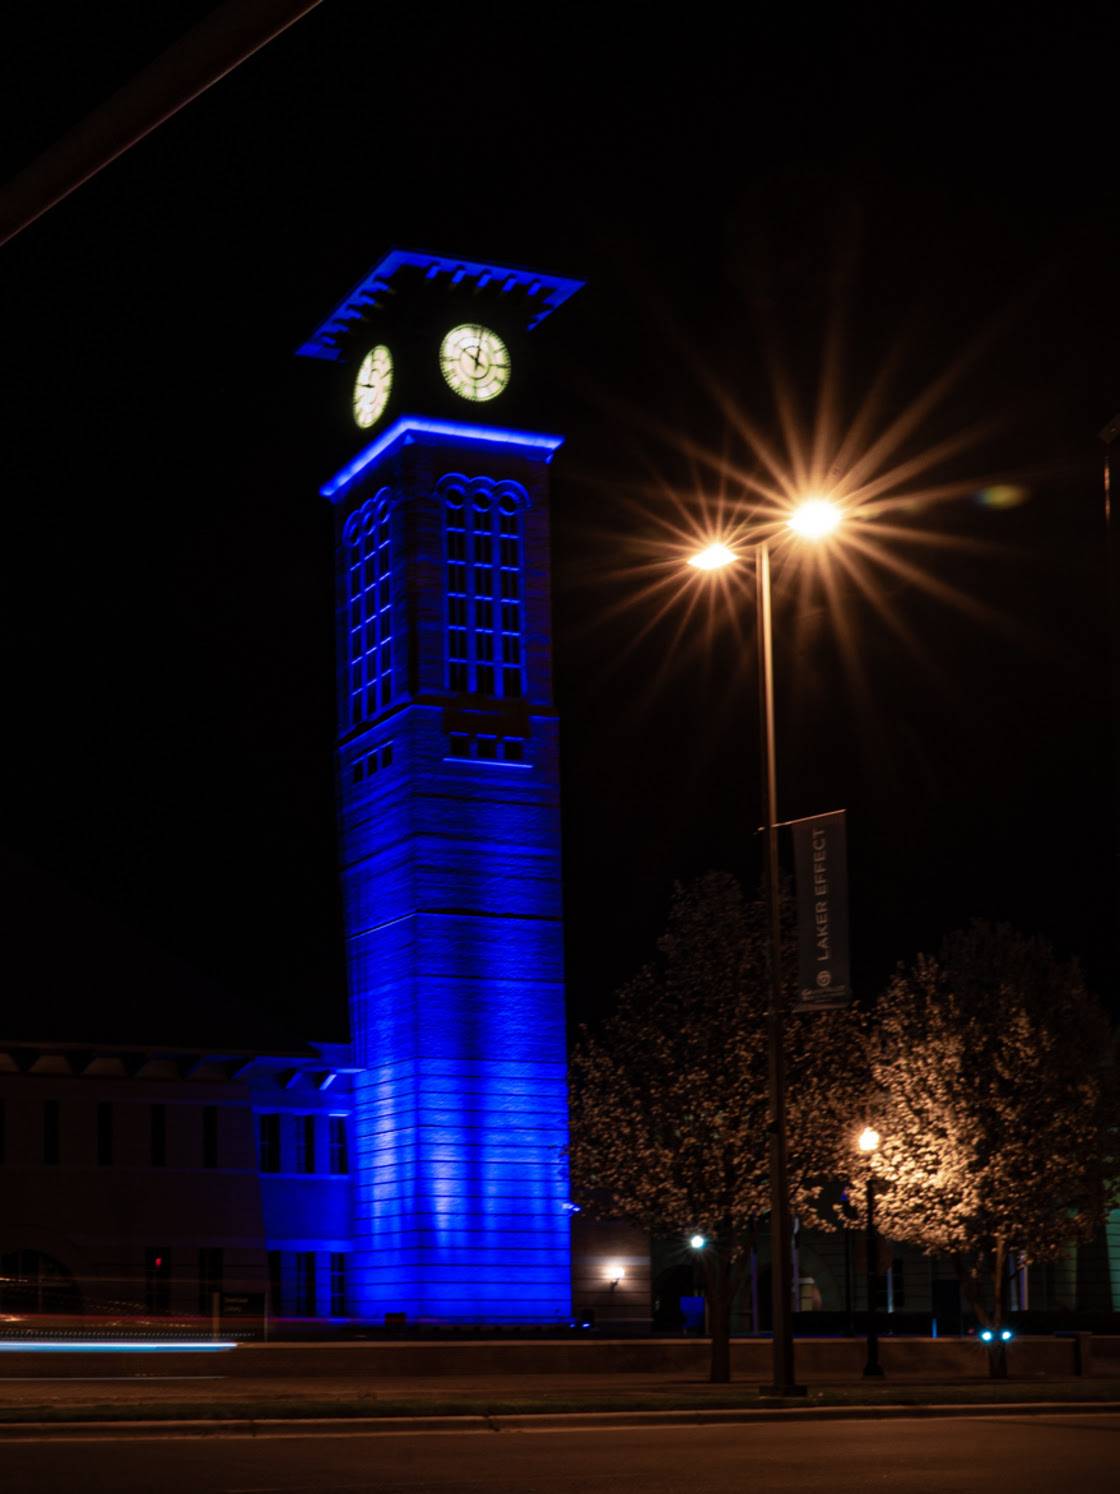 GVSU turns the Beckering Family Carillon Tower, on its Grand Rapids Campus, blue as a way to thank critical workers for their service during the COVID-19 pandemic